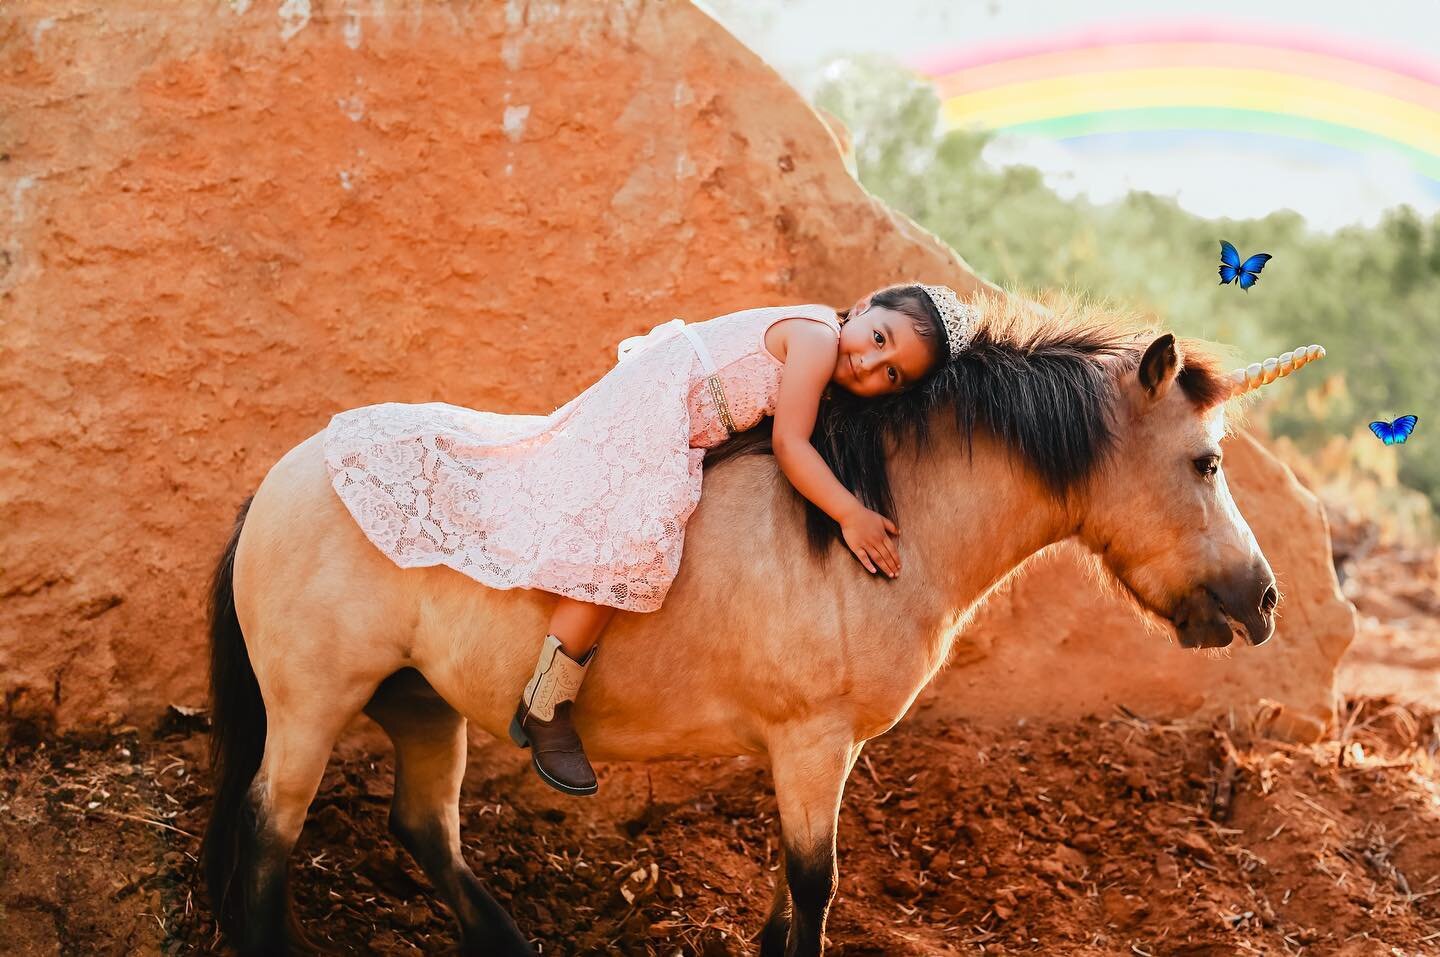 Small sneak peek of our unicorn session! 
We had a vision and made it come to life!! 
Book your birthday photoshoot today! 

Brianna Salinas Photography

#localphotographer #southtexasphotographer #sanantonio #kidphotographer #minisessionphotography 